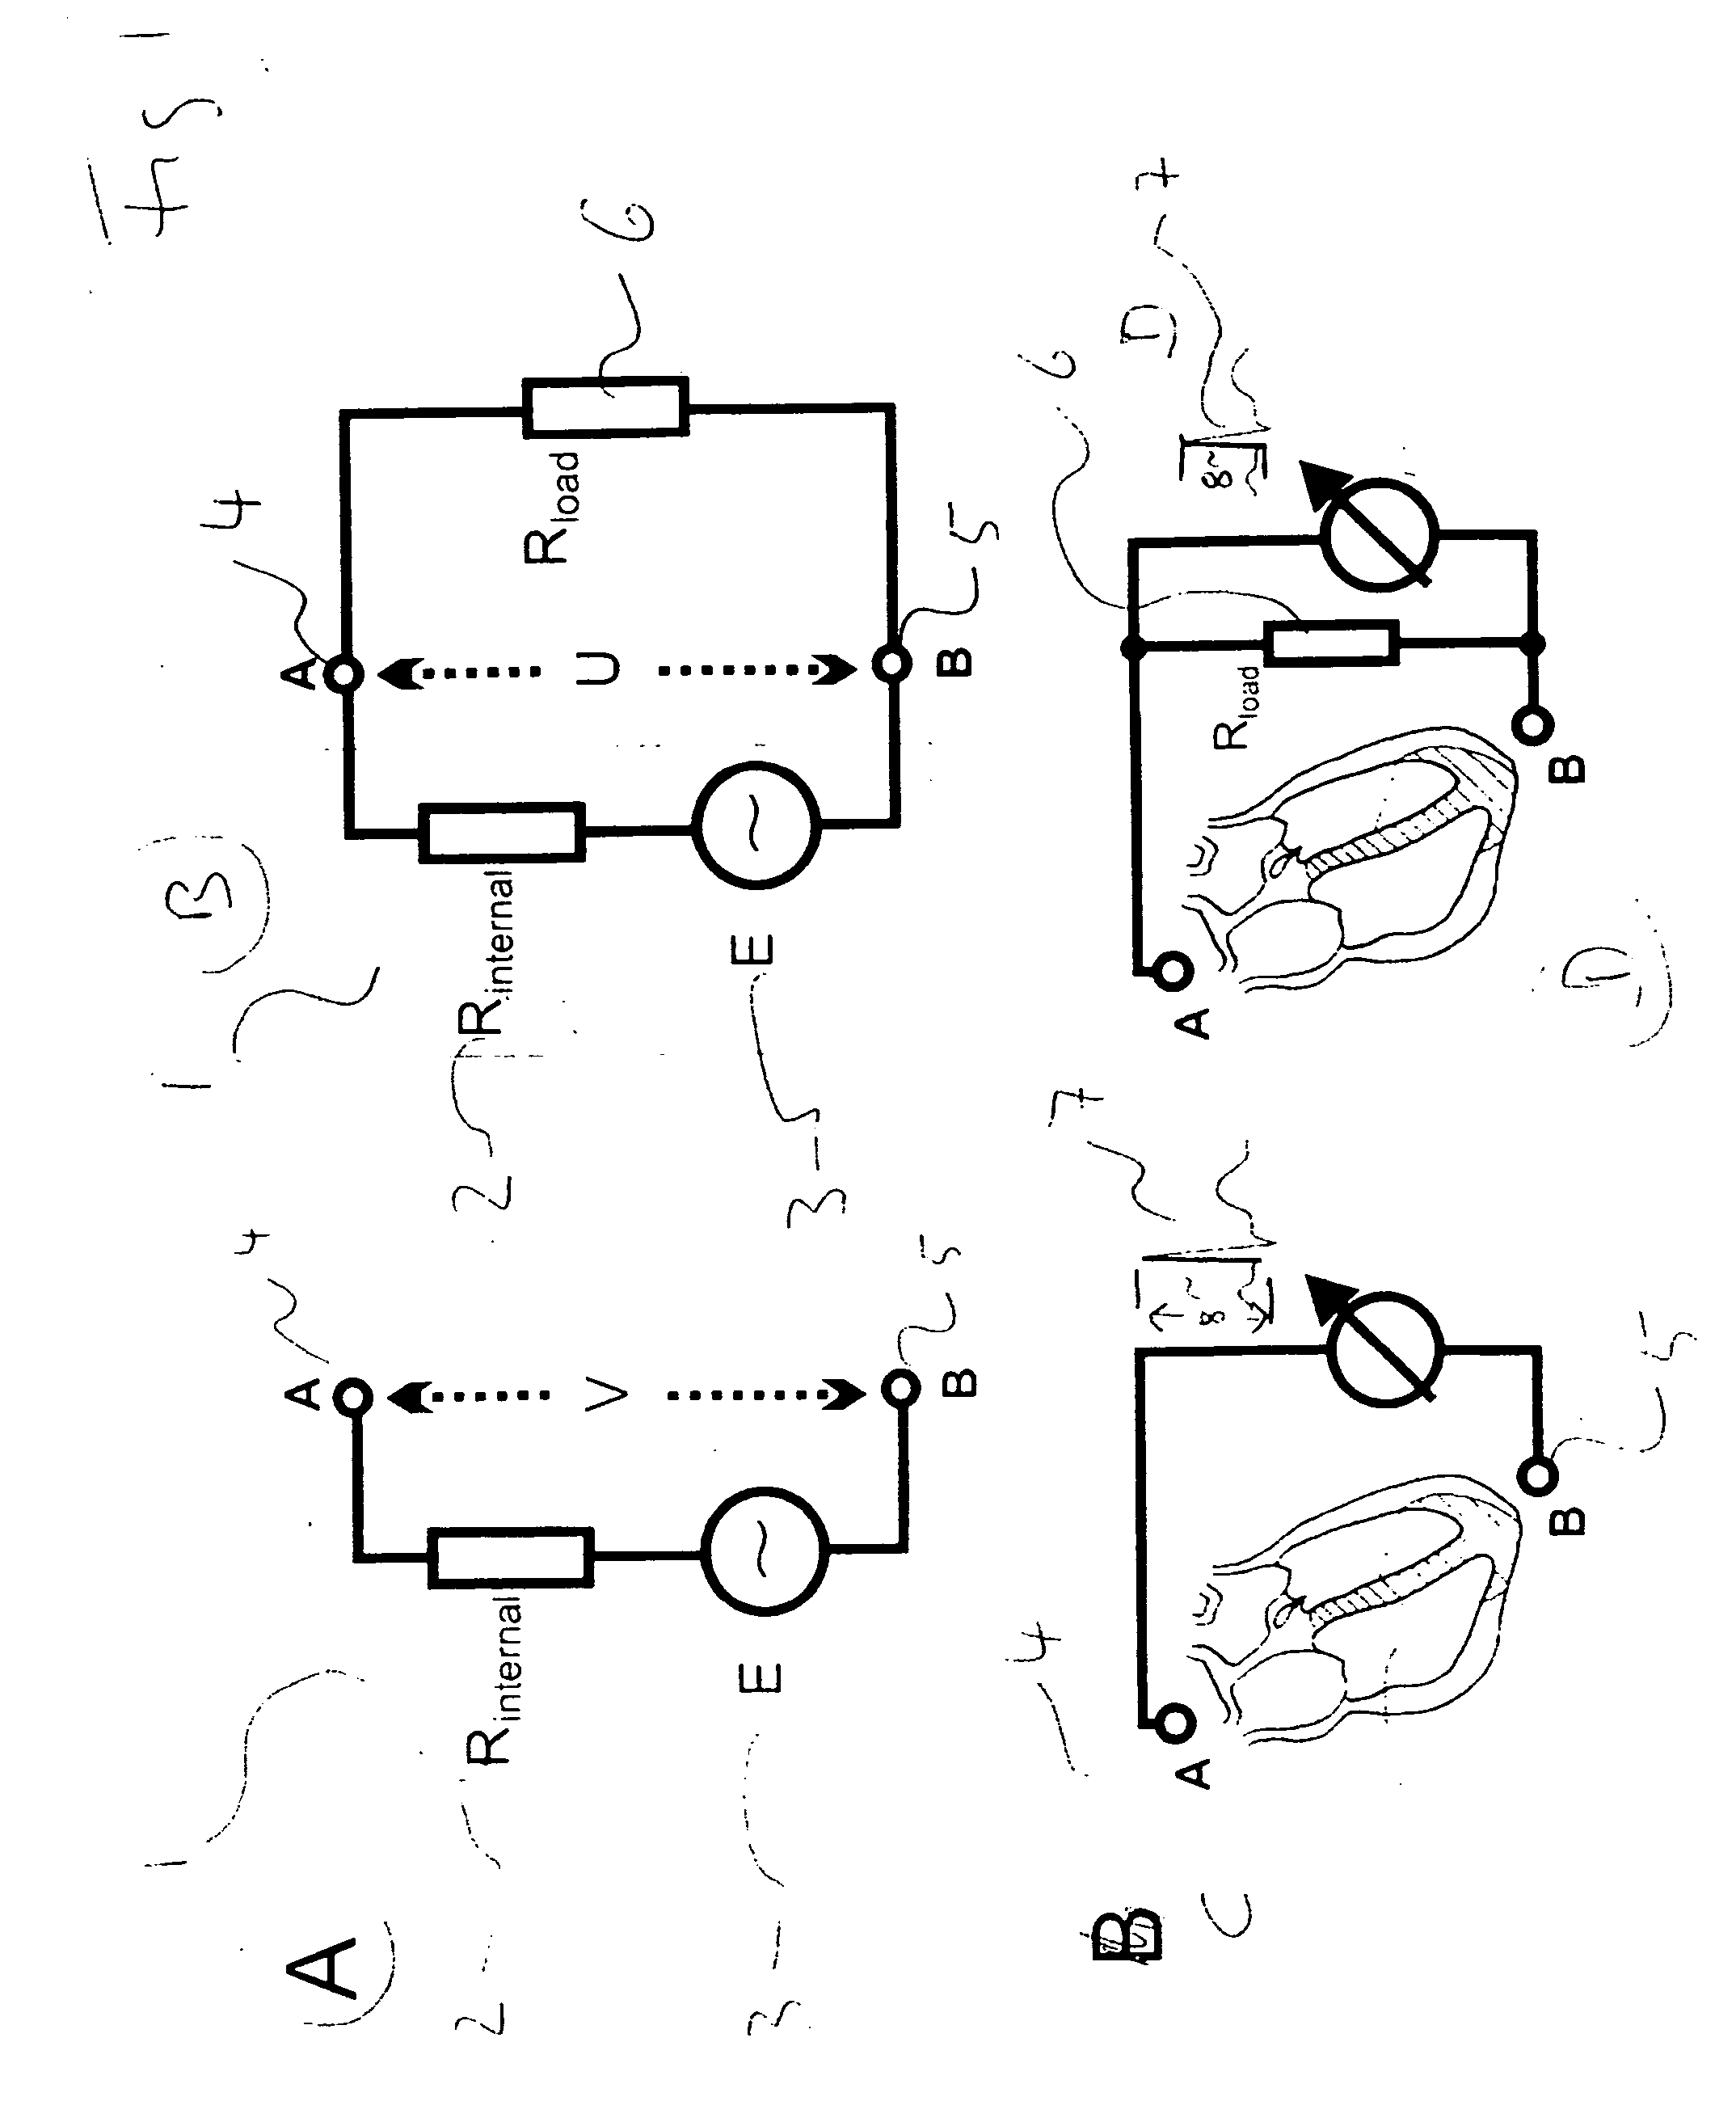 Method and device for using impedance measurements based on electrical energy of the heart